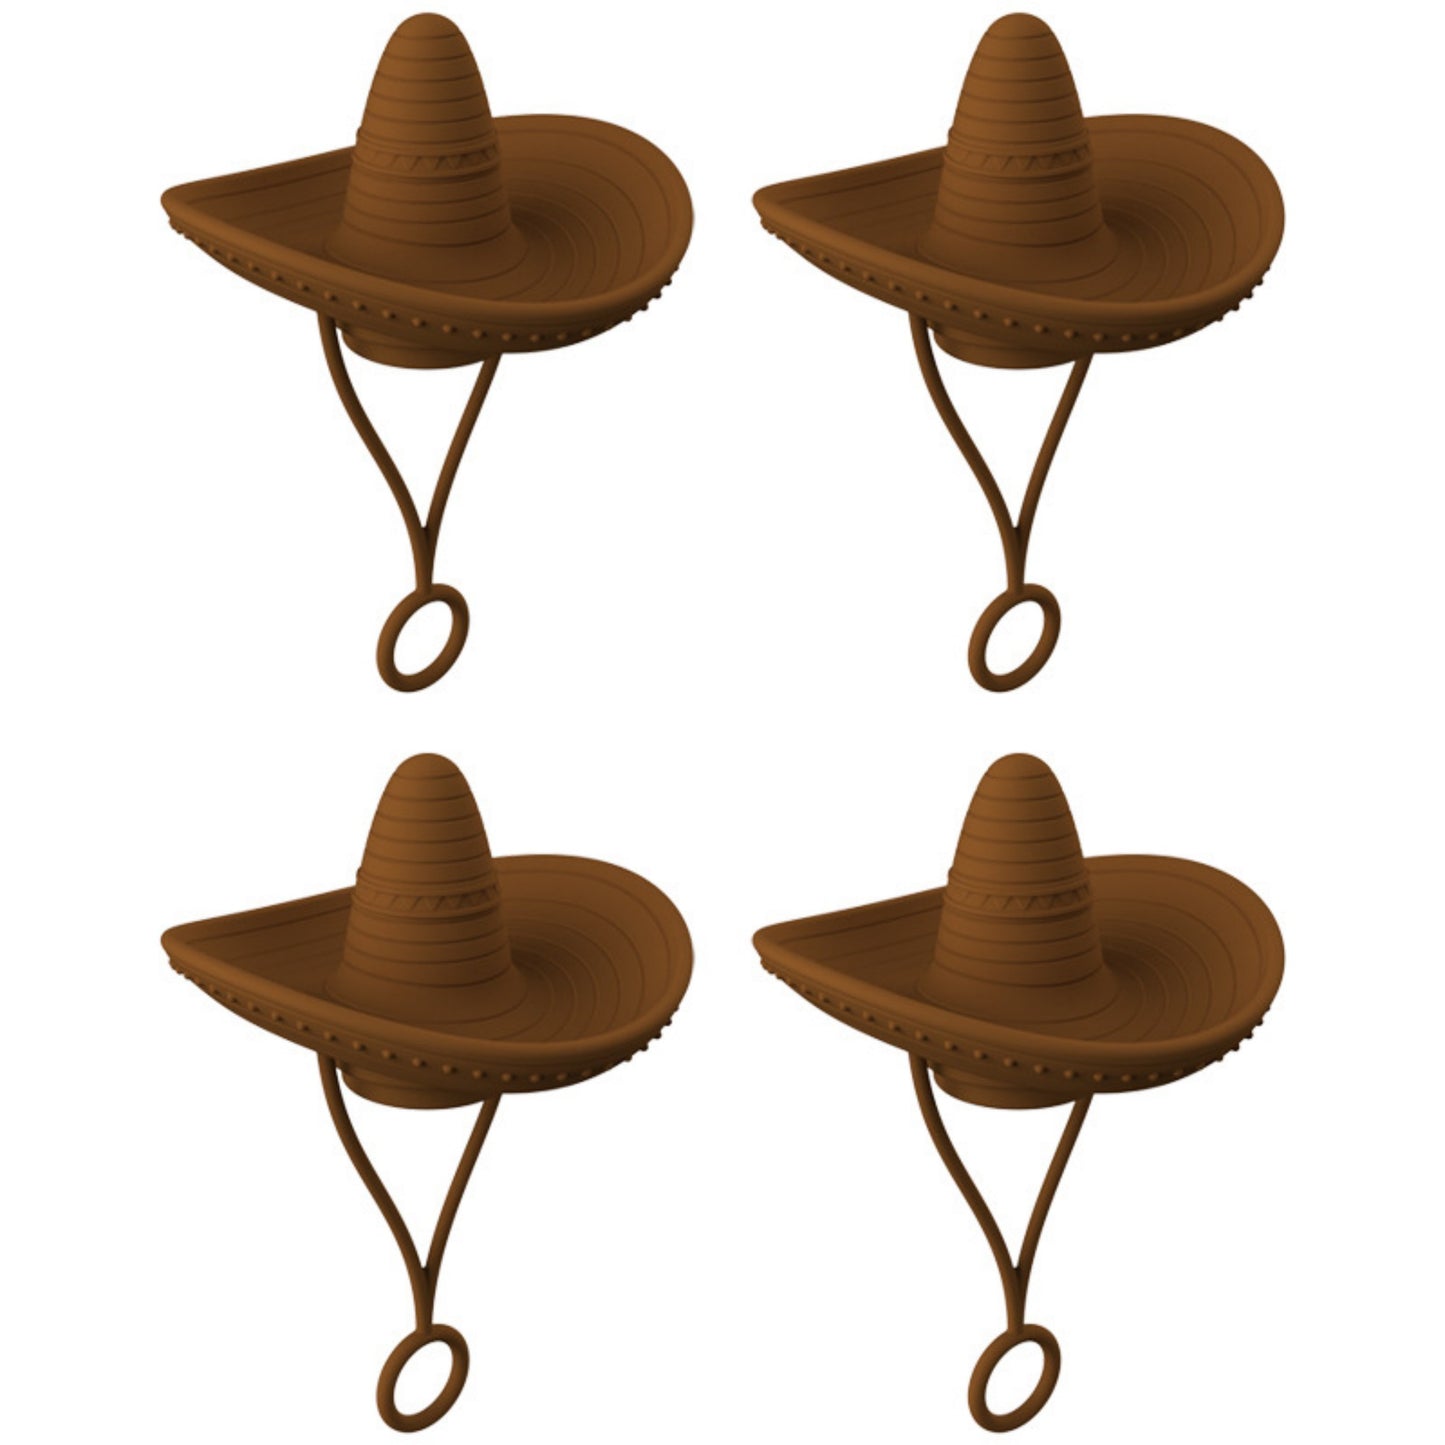 New Style Straw Covers Cap Novelty Sturdy Straw Toppers Reusable Cowboy Hat Shaped For Camping Home Hiking Picnic Kitchen